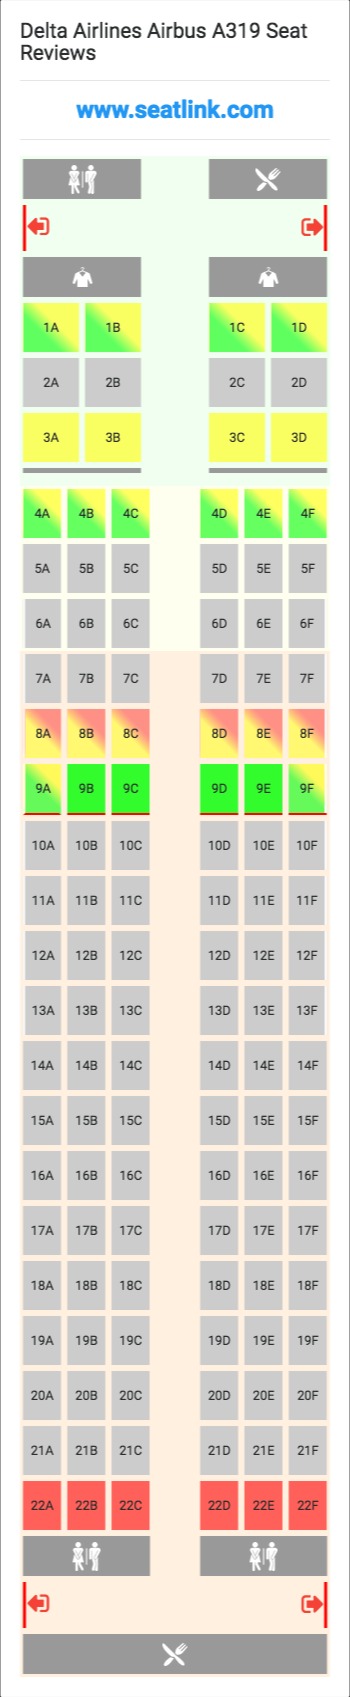 Delta Airlines Airbus A319 (319) Seat Map